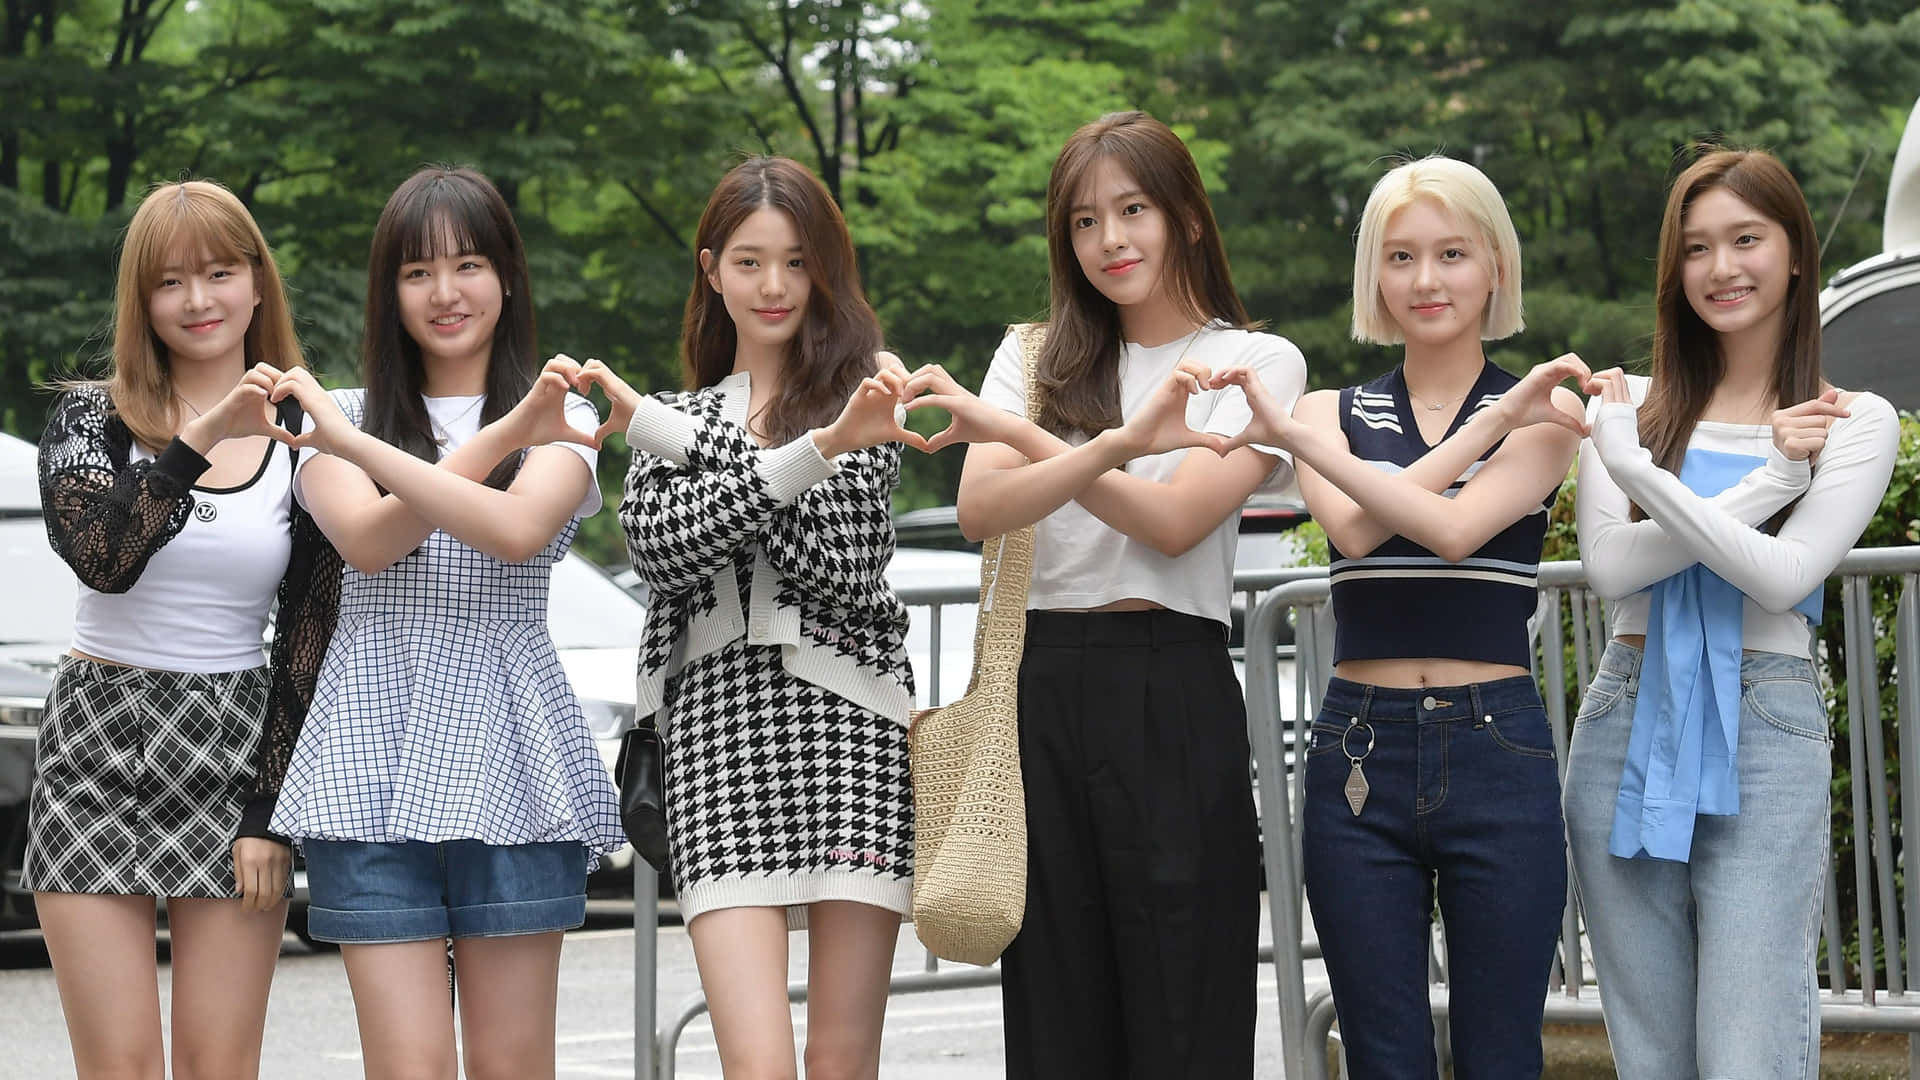 Groupof Friends Making Heart Signs Outdoors Wallpaper